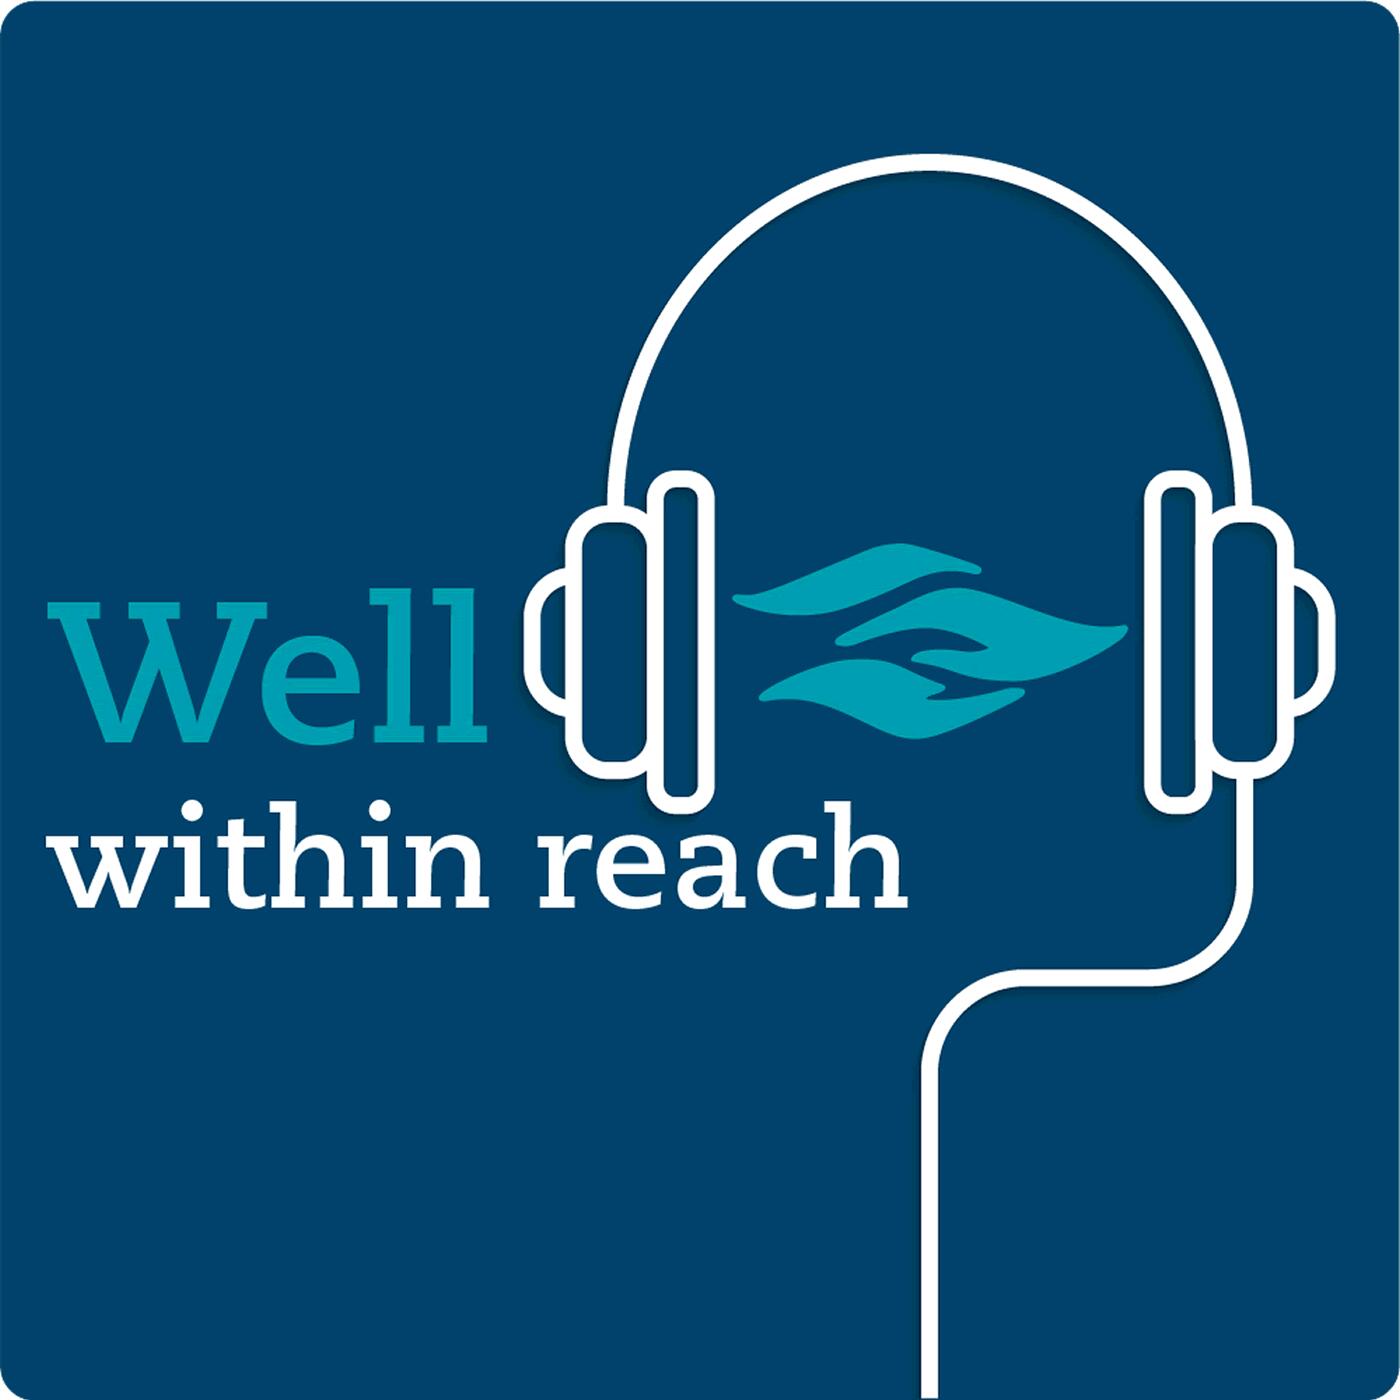 Podcast Health. Within reach